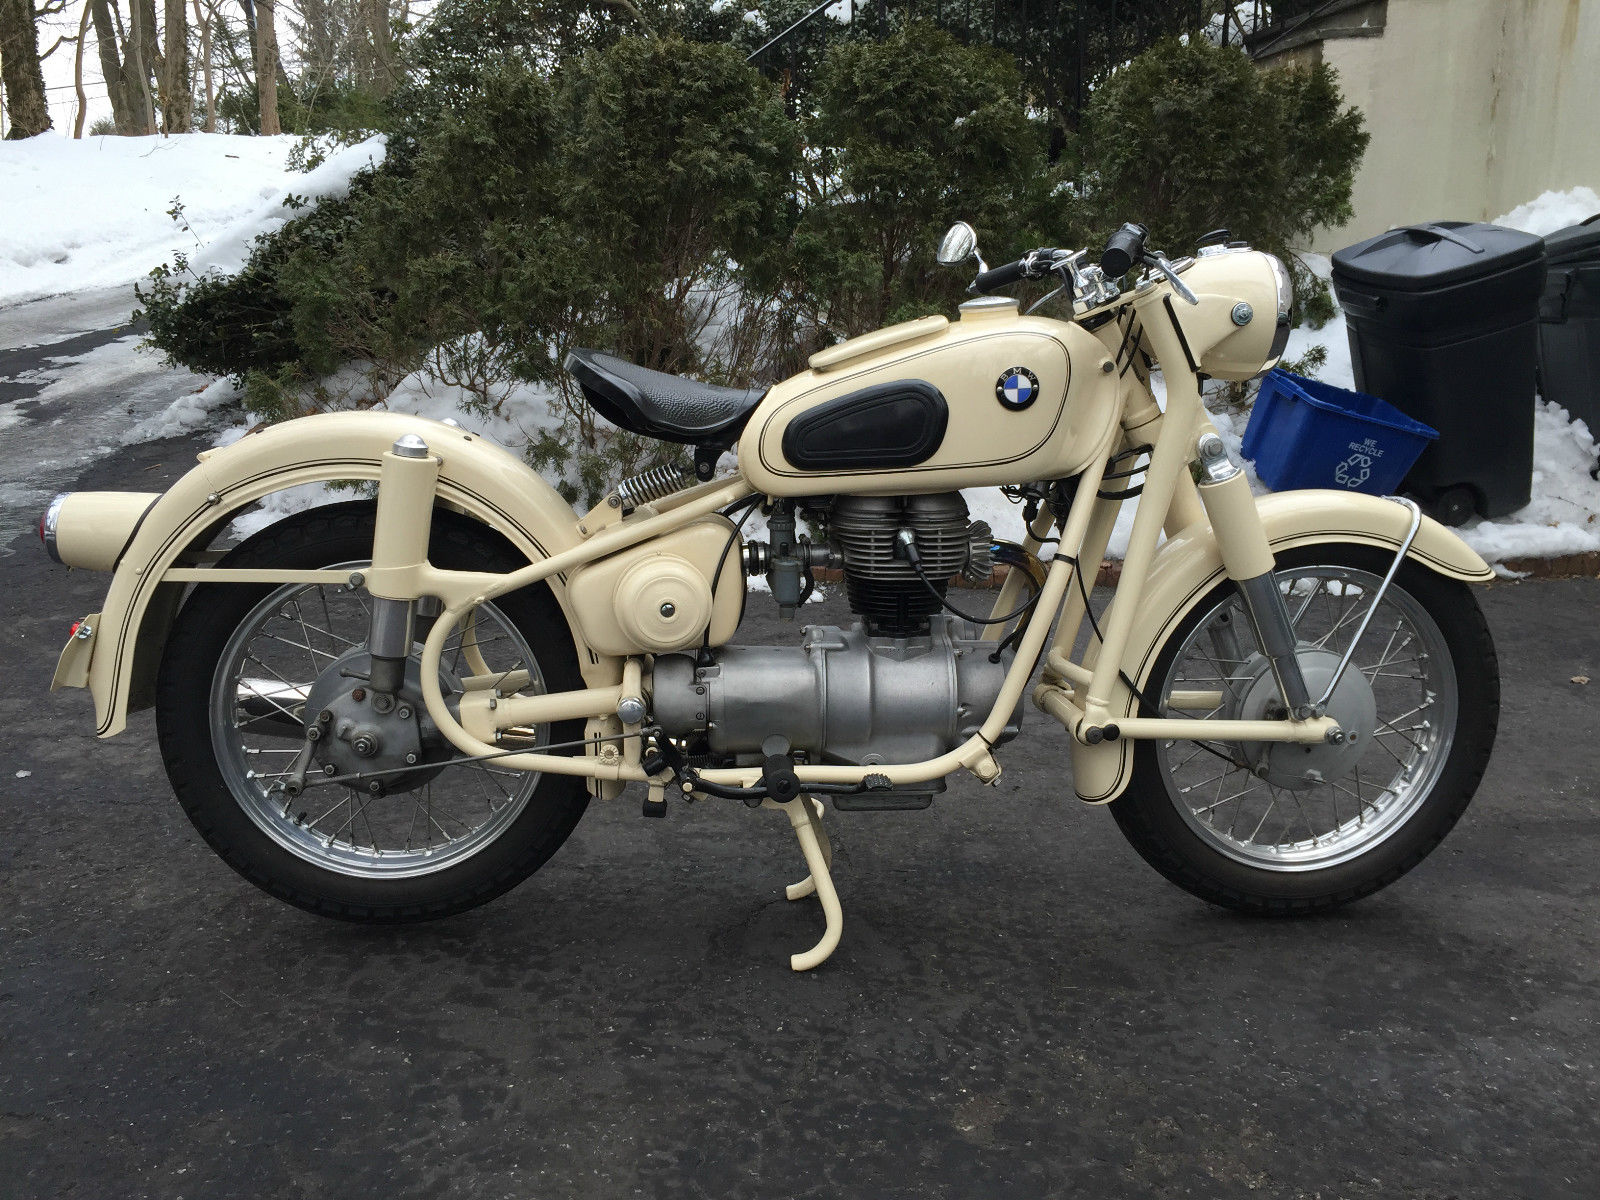 BMW R27 - 1965 - Right Side View, Fenders, Brakes, Seat Spring, Gearbox and Shaft Drive.